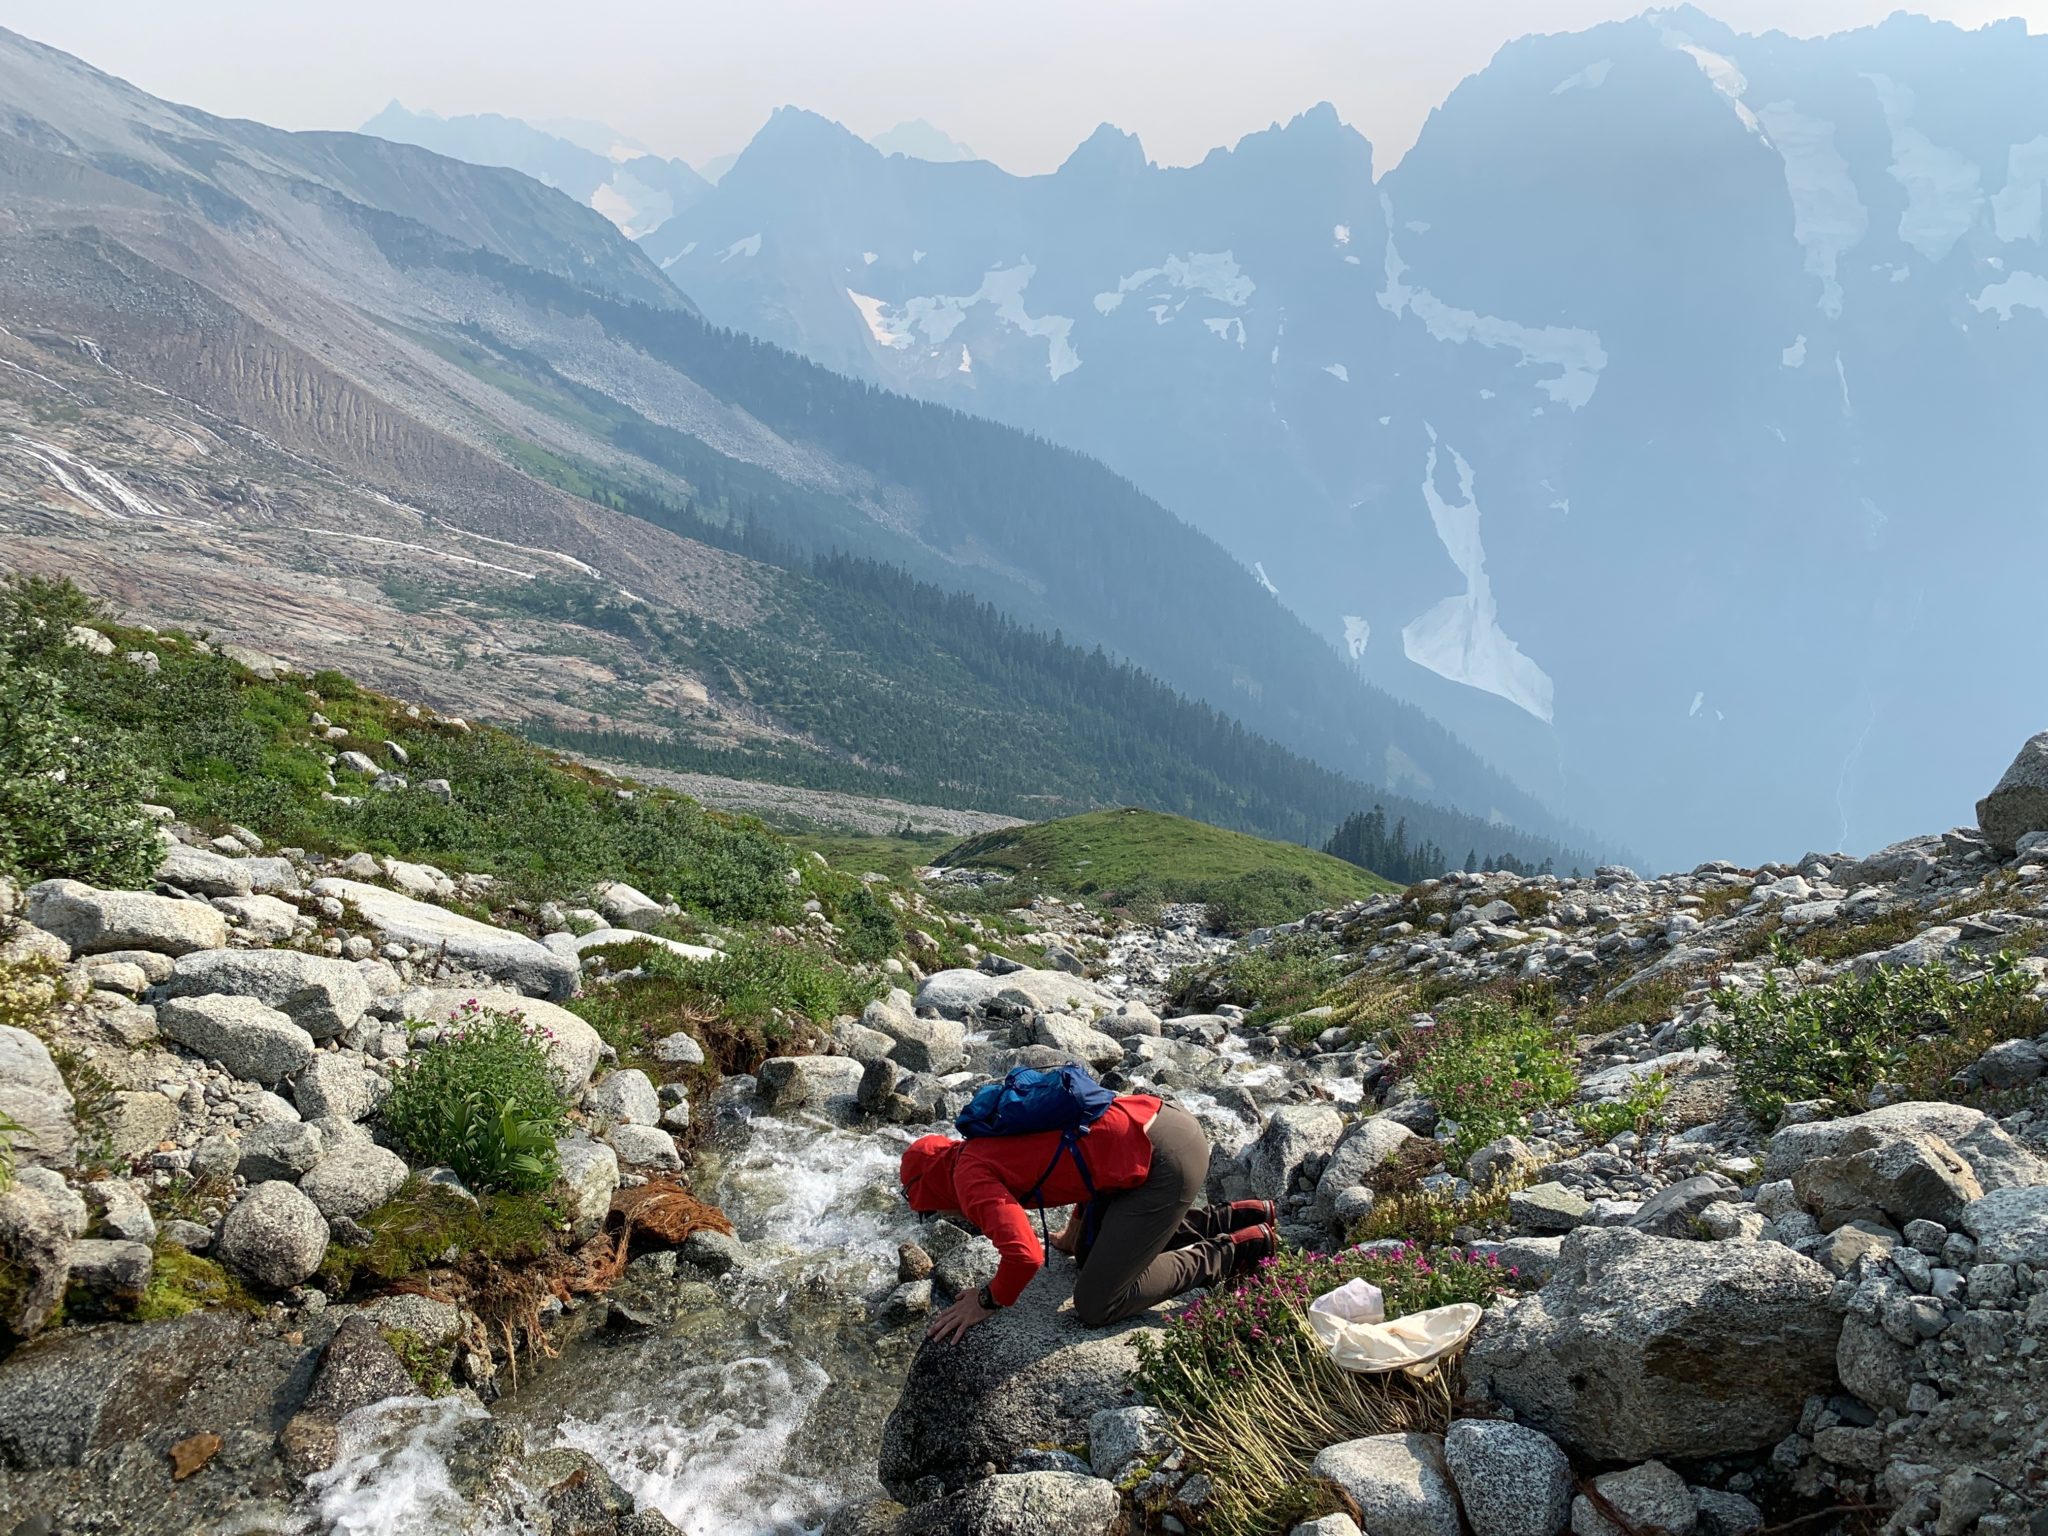 Researcher in the North Cascades mountains